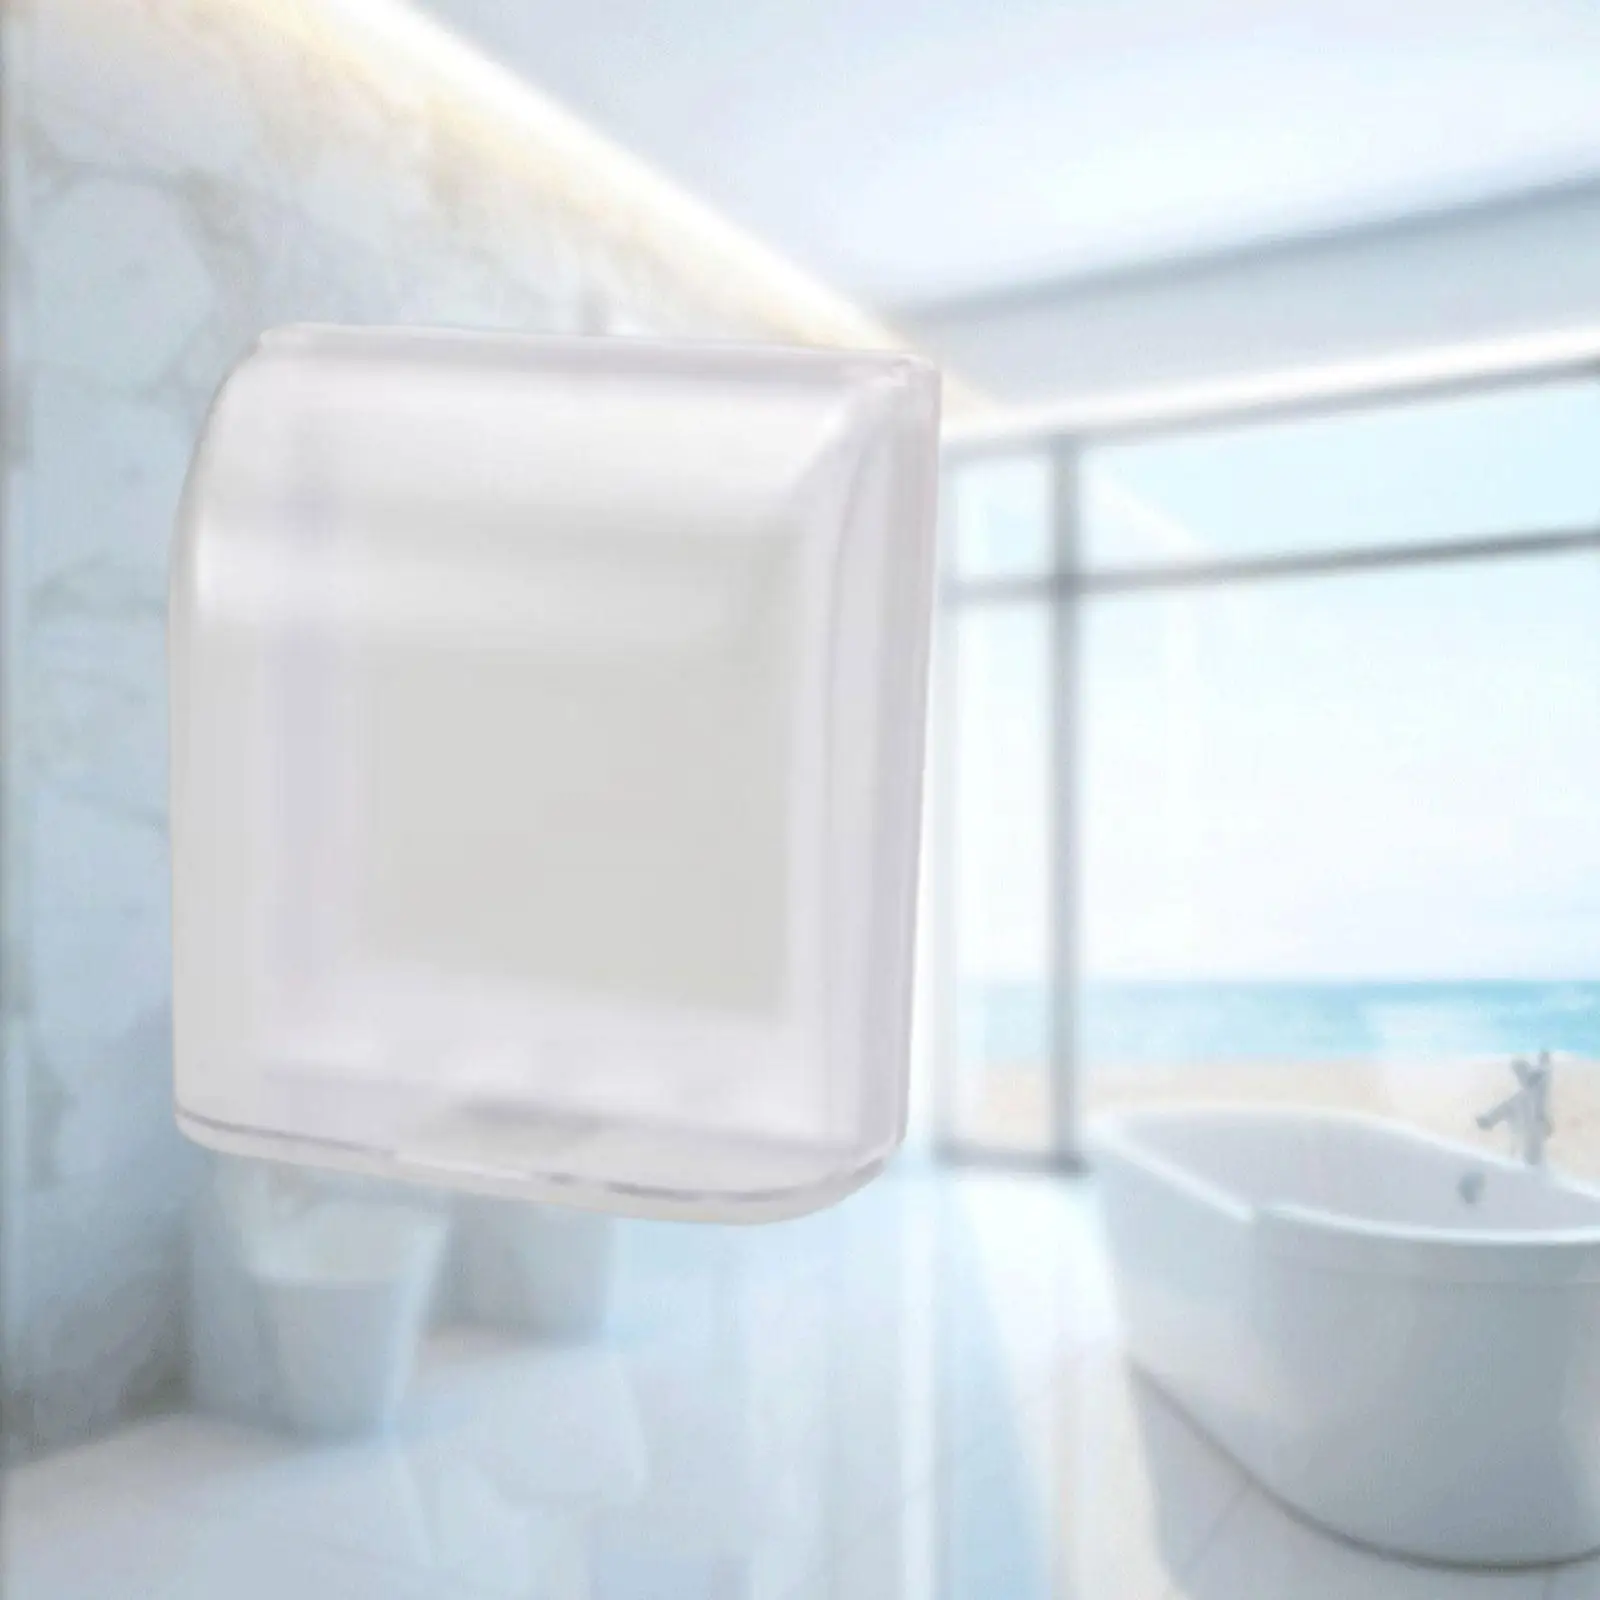 Weatherproof Outlet Cover Wall Switch Cover for Bathroom Restaurant Kitchen